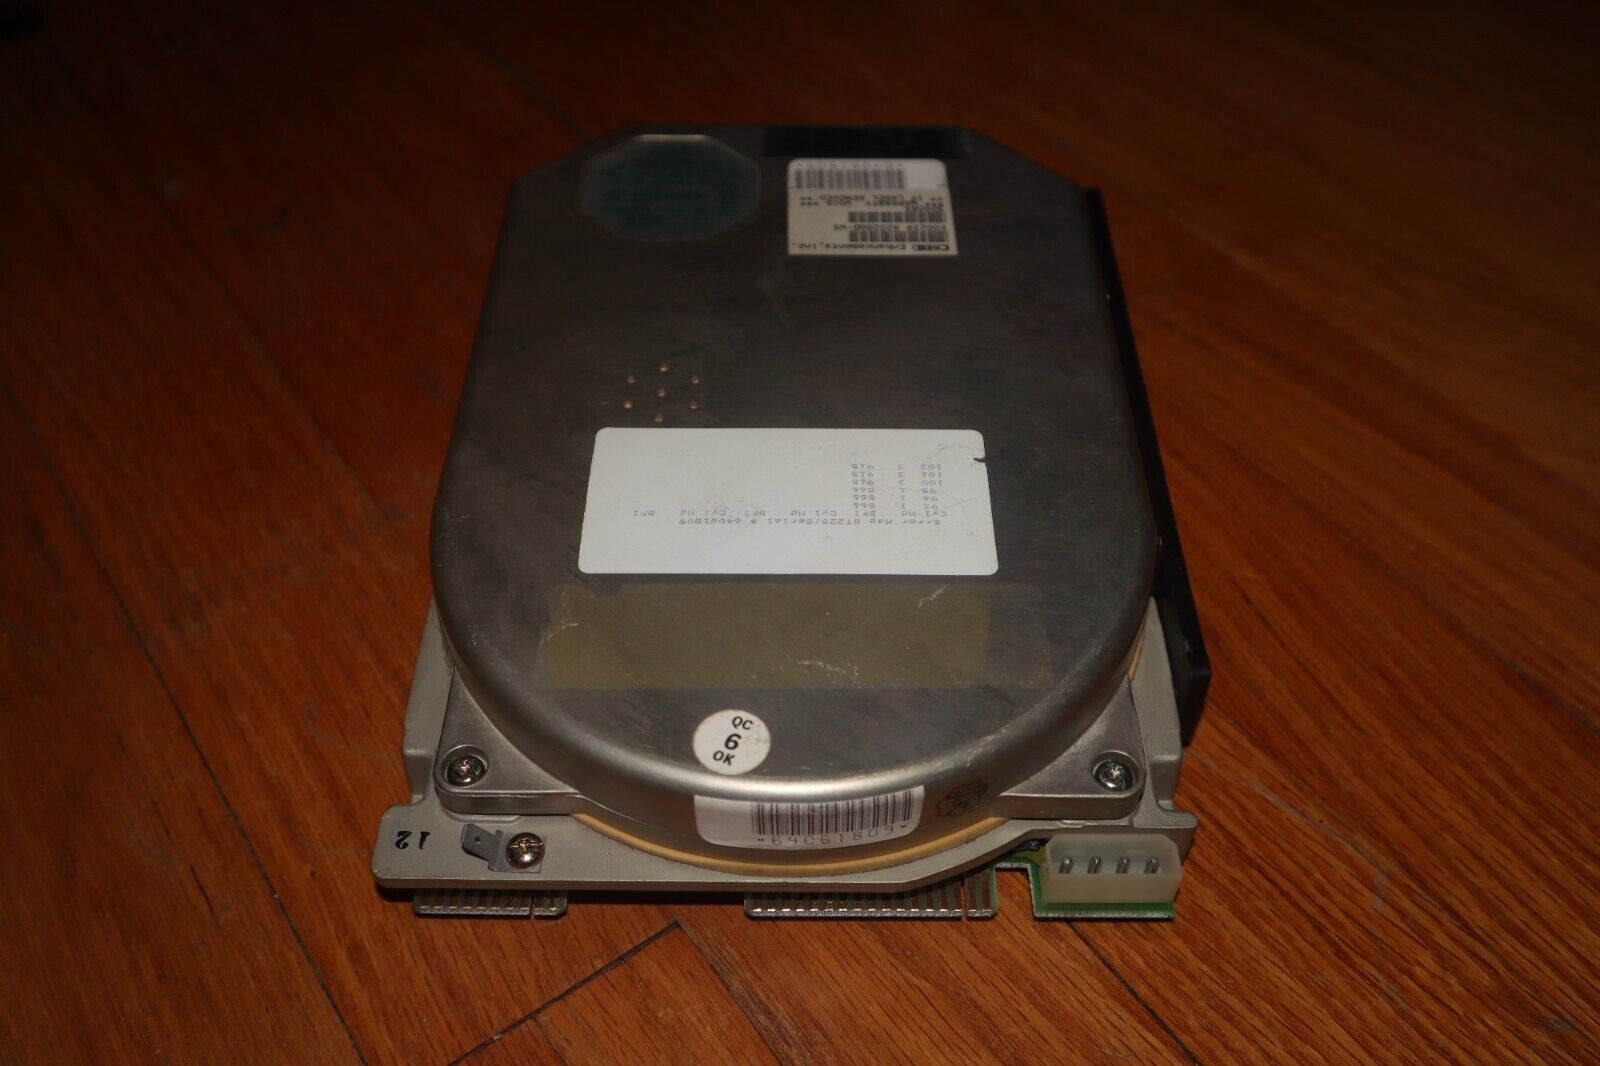 ST-225 Hard Drive *Spins Up*